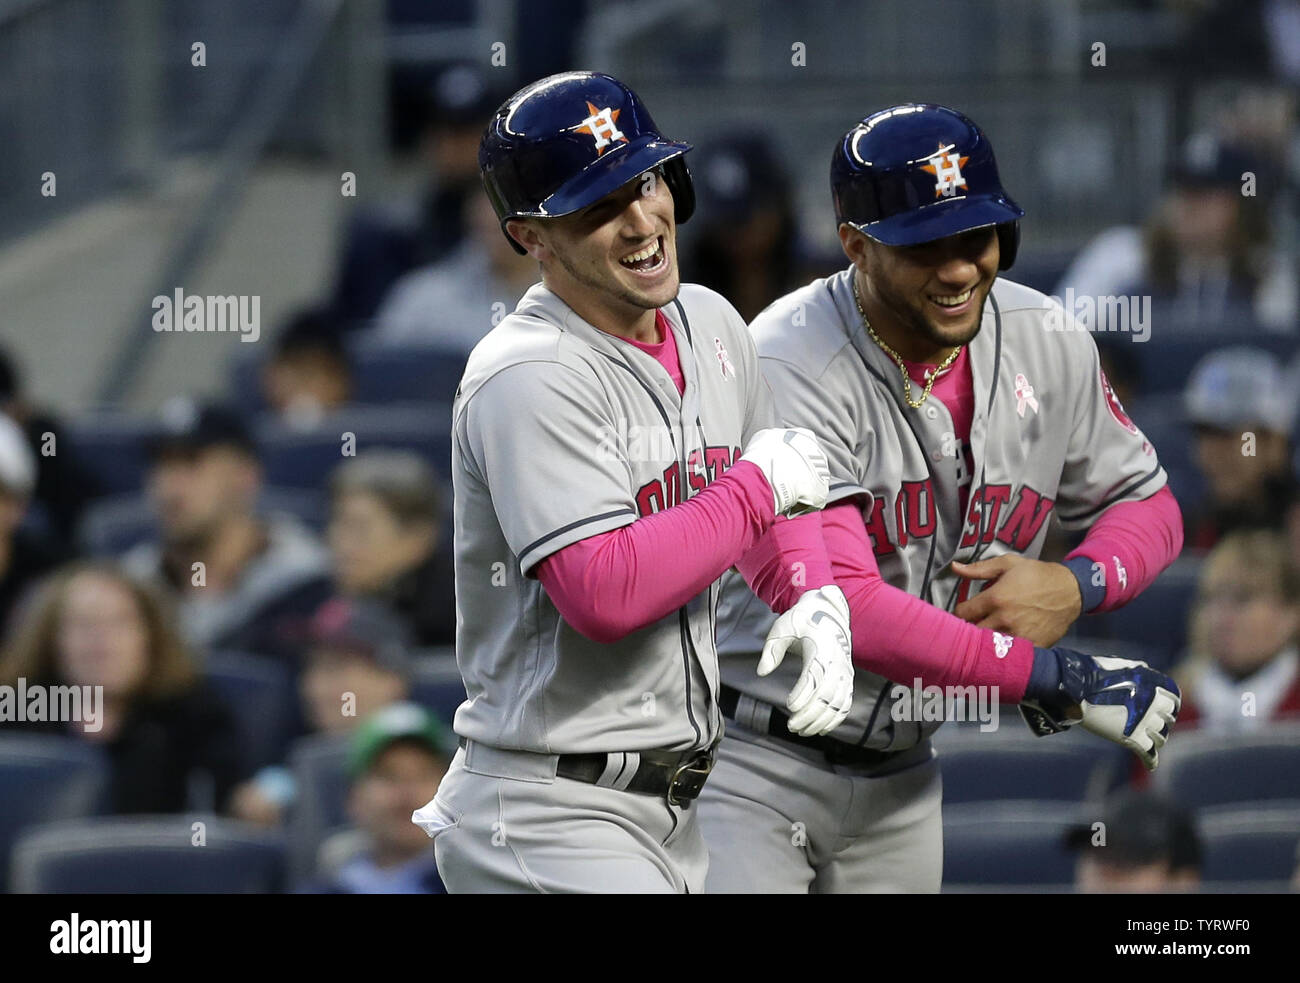 Houston Astros Alex Bregman celebrates with Yuli Gurriel after hitting a grand slam in the first inning off of New York Yankees starting pitcher Masahiro Tanaka at Yankee Stadium in New York City on May 14, 2017. The New York Yankees former shortstop Derek Jeter before the game had his No. 2 retired and was also honored with a plaque in Monument Park.     Photo by John Angelillo/UPI Stock Photo